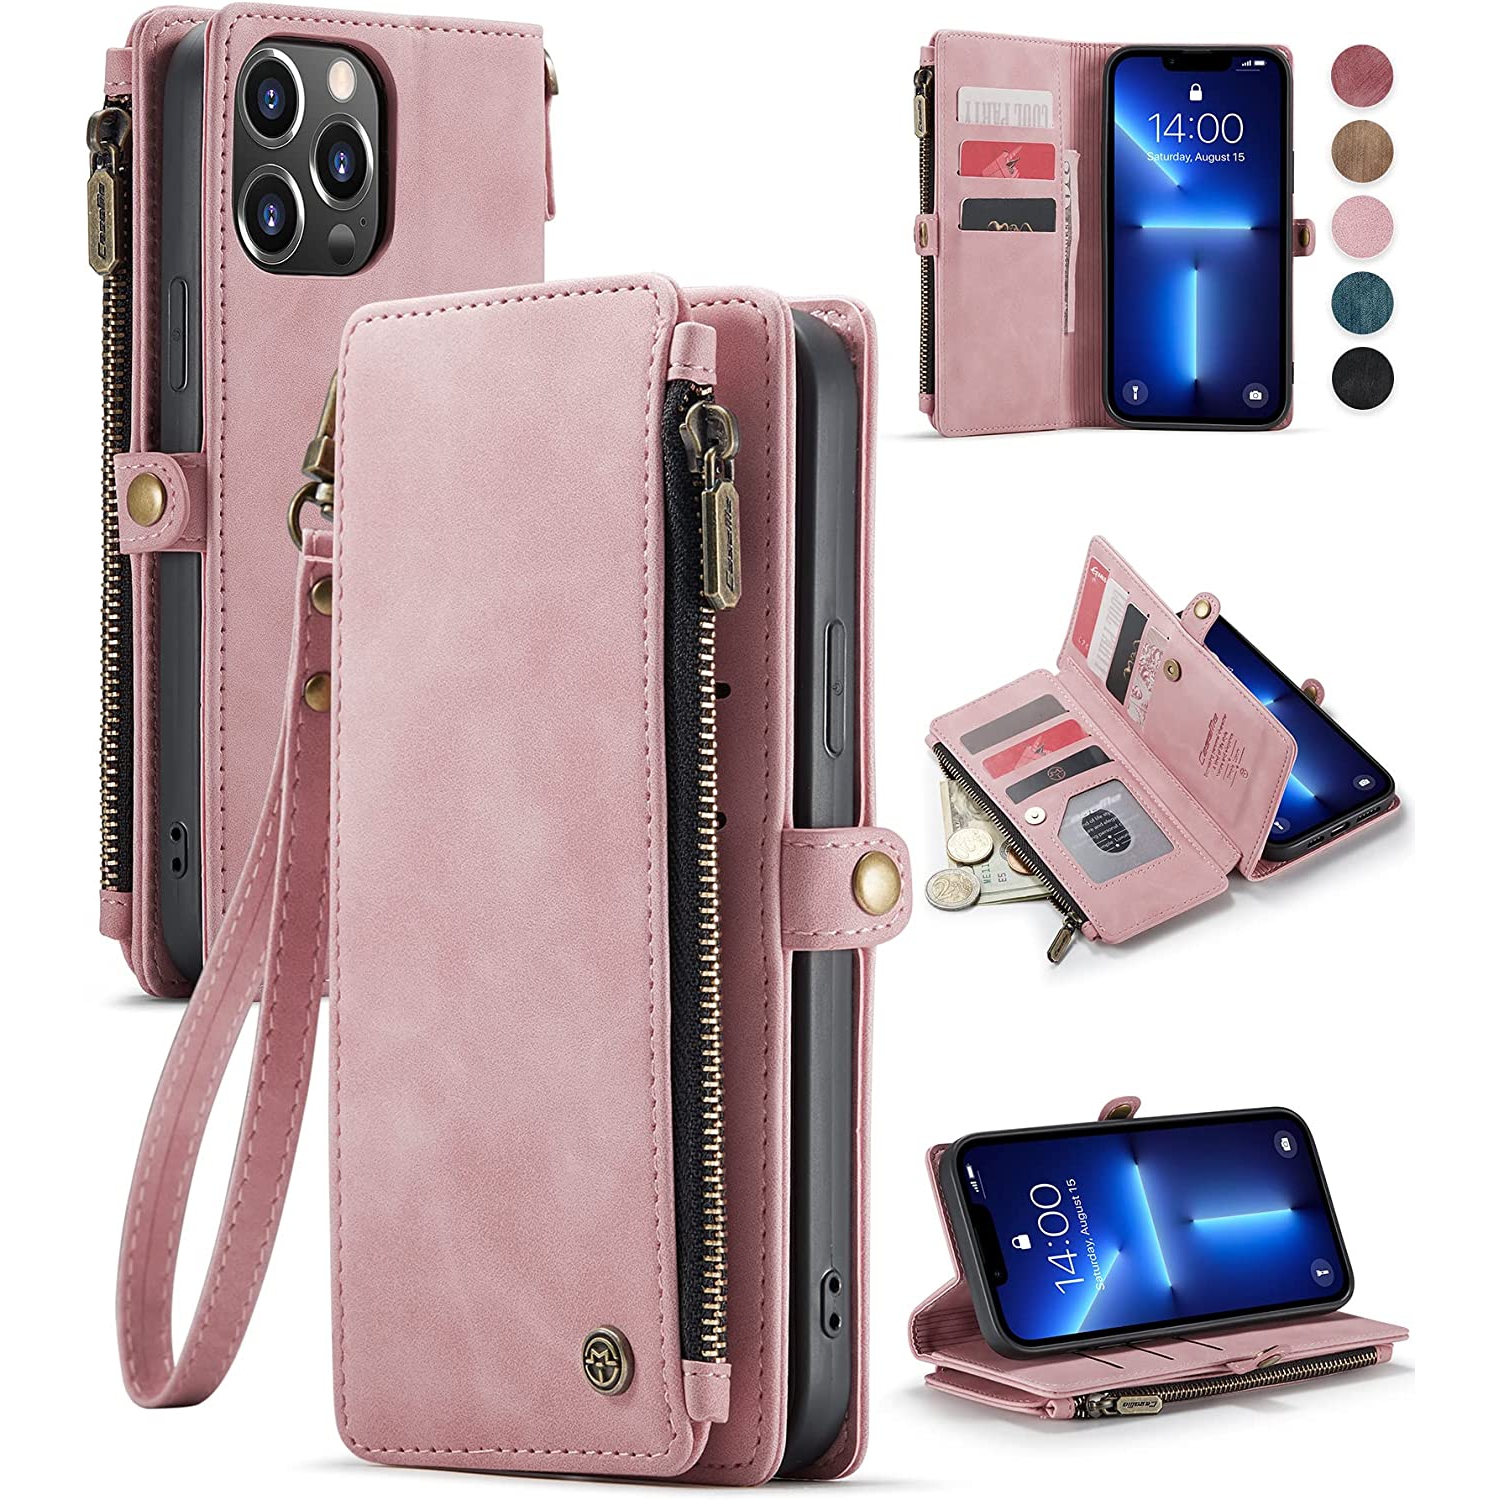 iPhone 13 Pro Max Case, iPhone 13 Pro Max Wallet Case for Women Men with Card Holder, Durable PU Leather